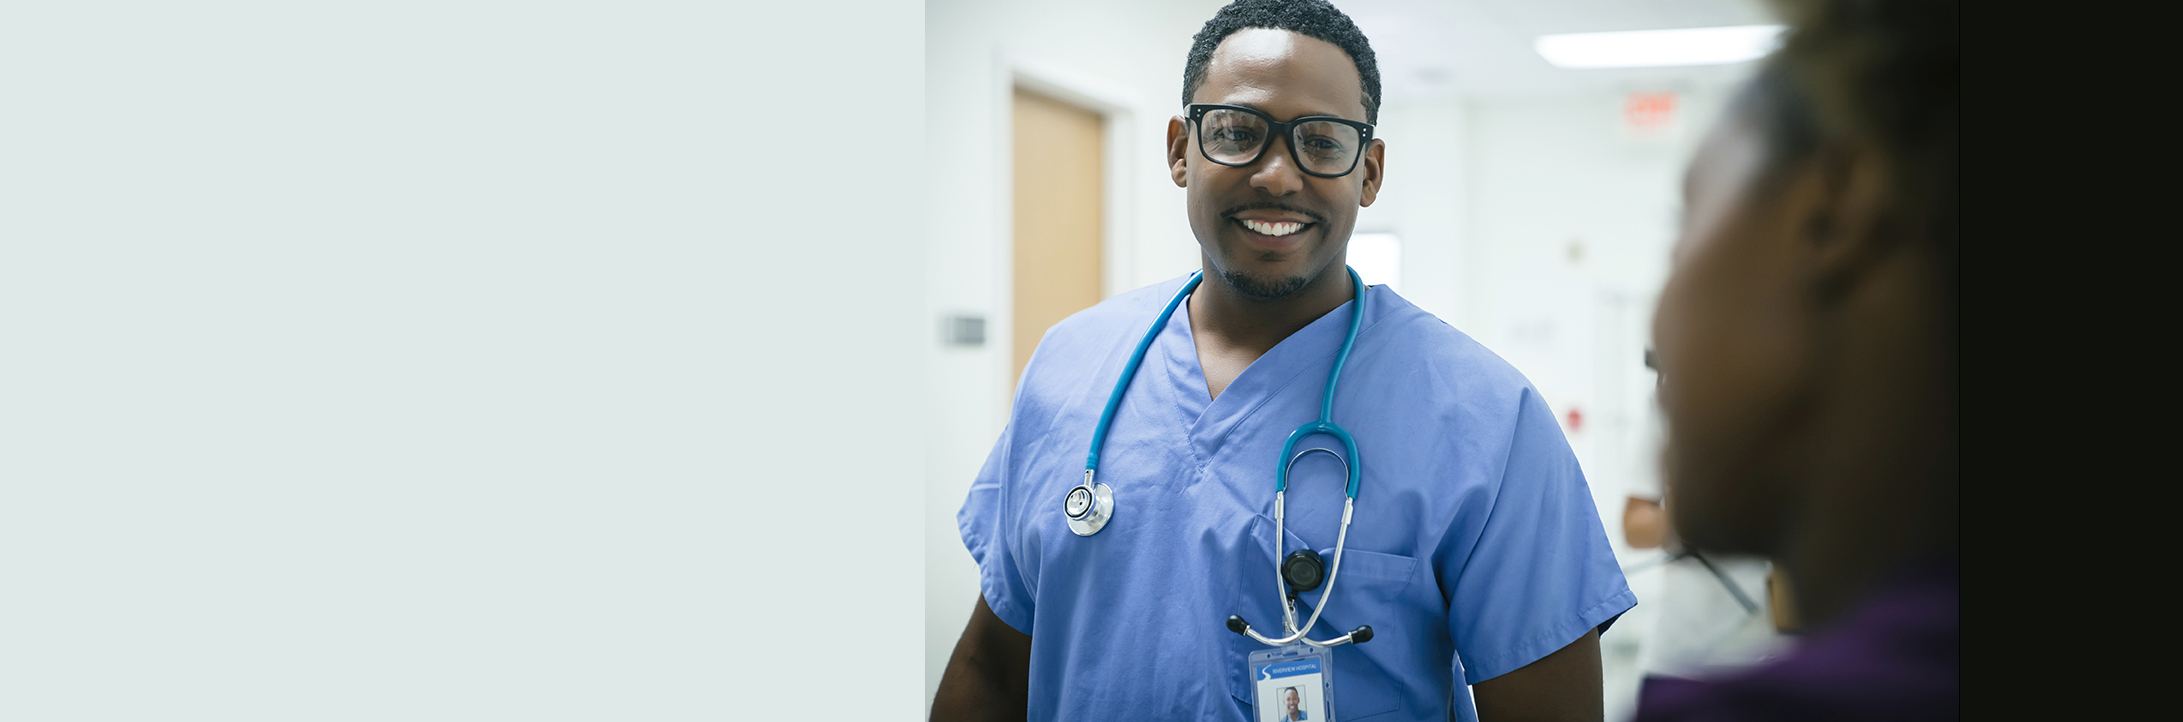 a black male doctor or nurse working in a hospital